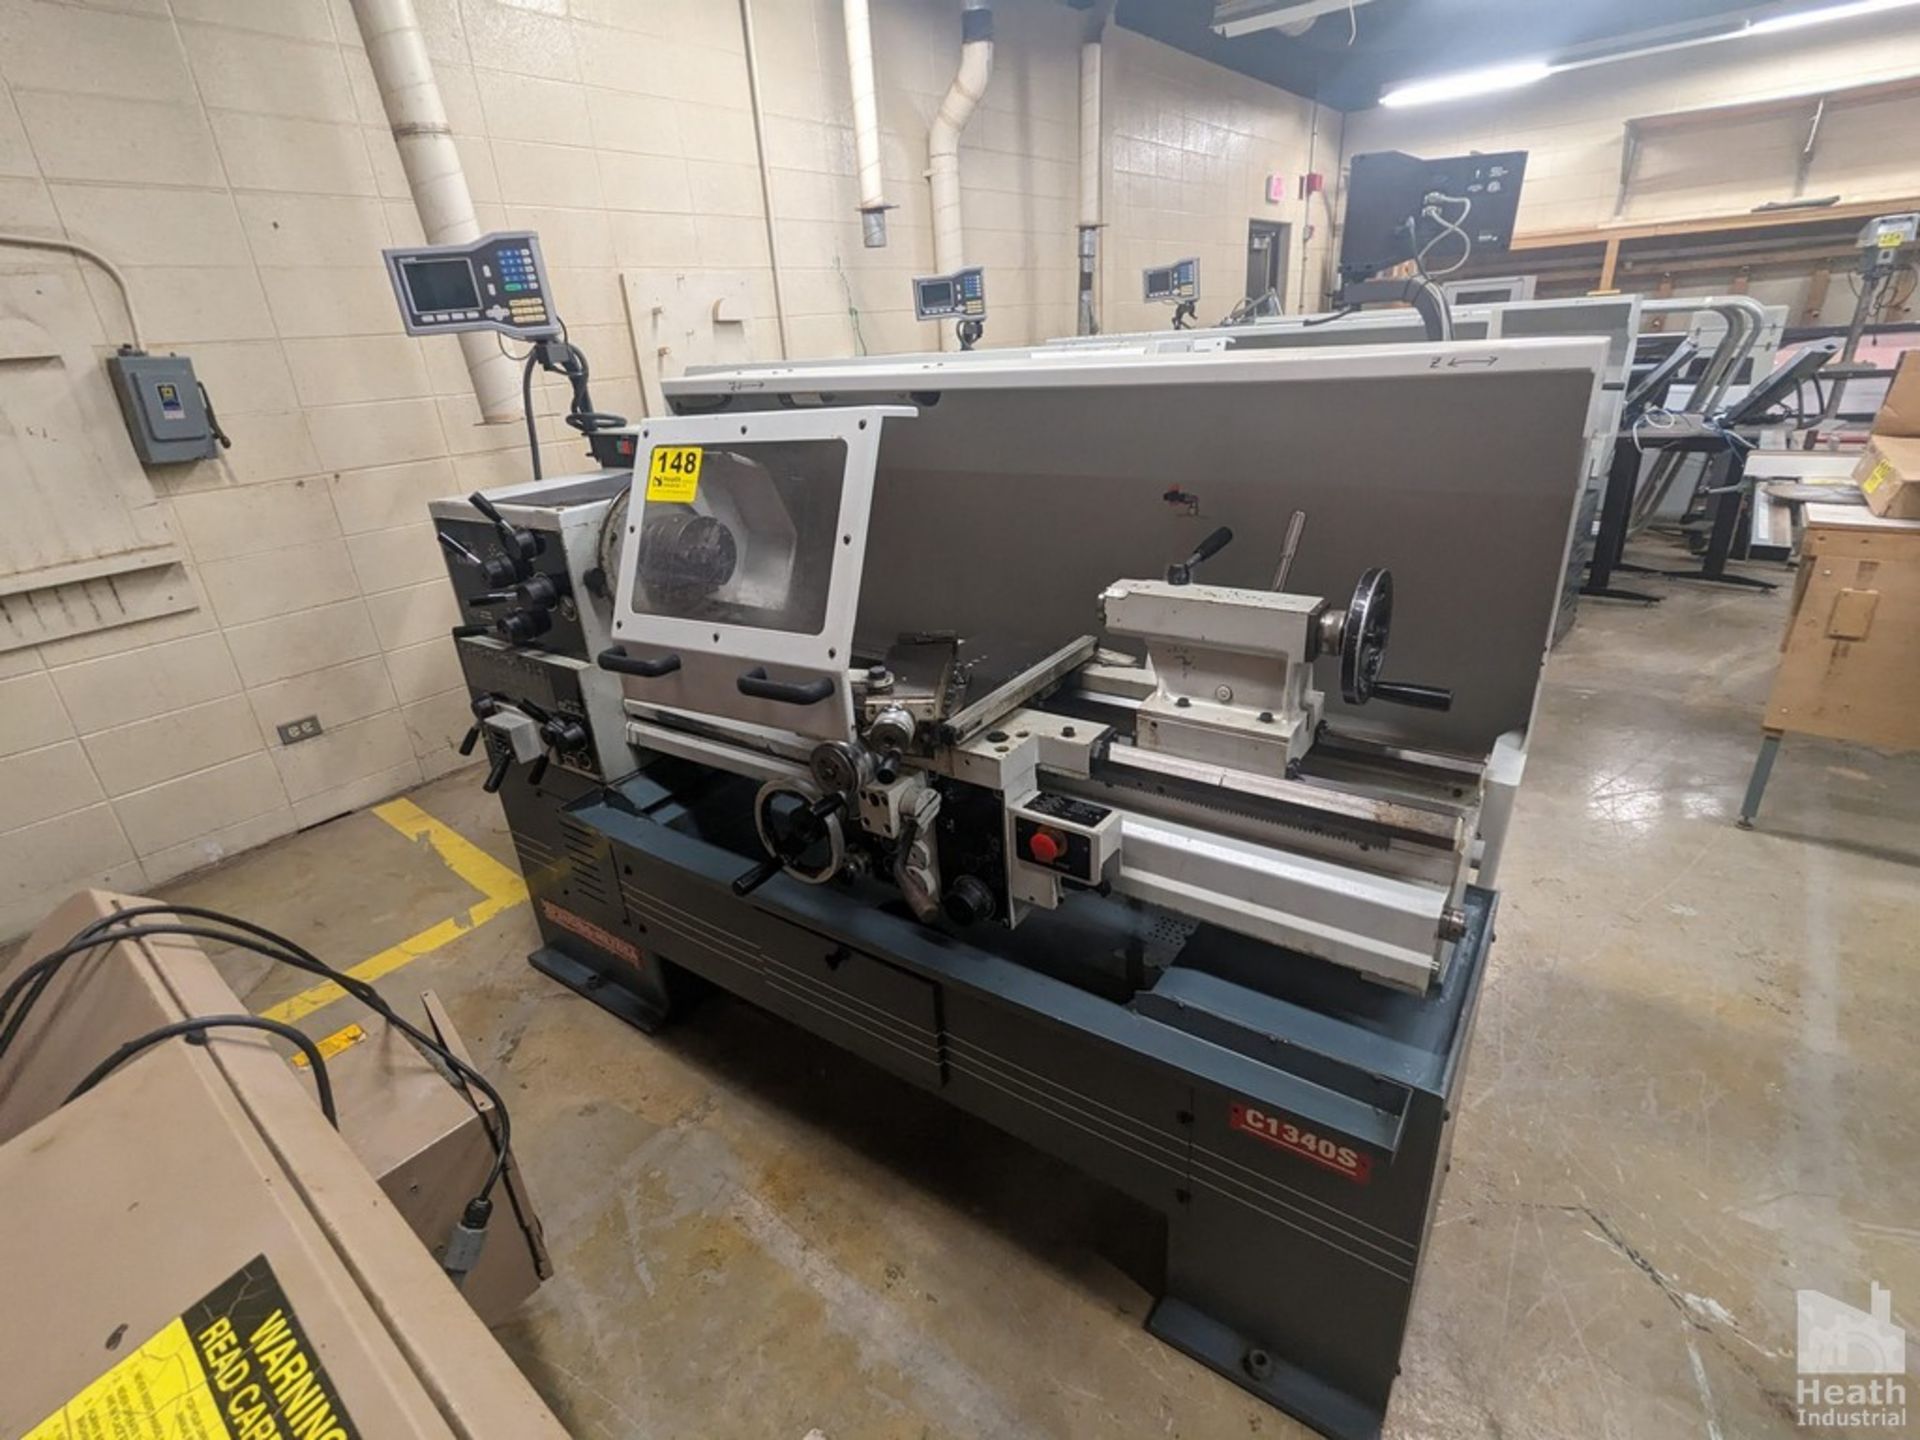 CLAUSING-METOSA 13"X40" MODEL 1340S TOOLROOM LATHE, S/N 50002, 2500 SPINDLE RPM, WITH 6" 3-JAW